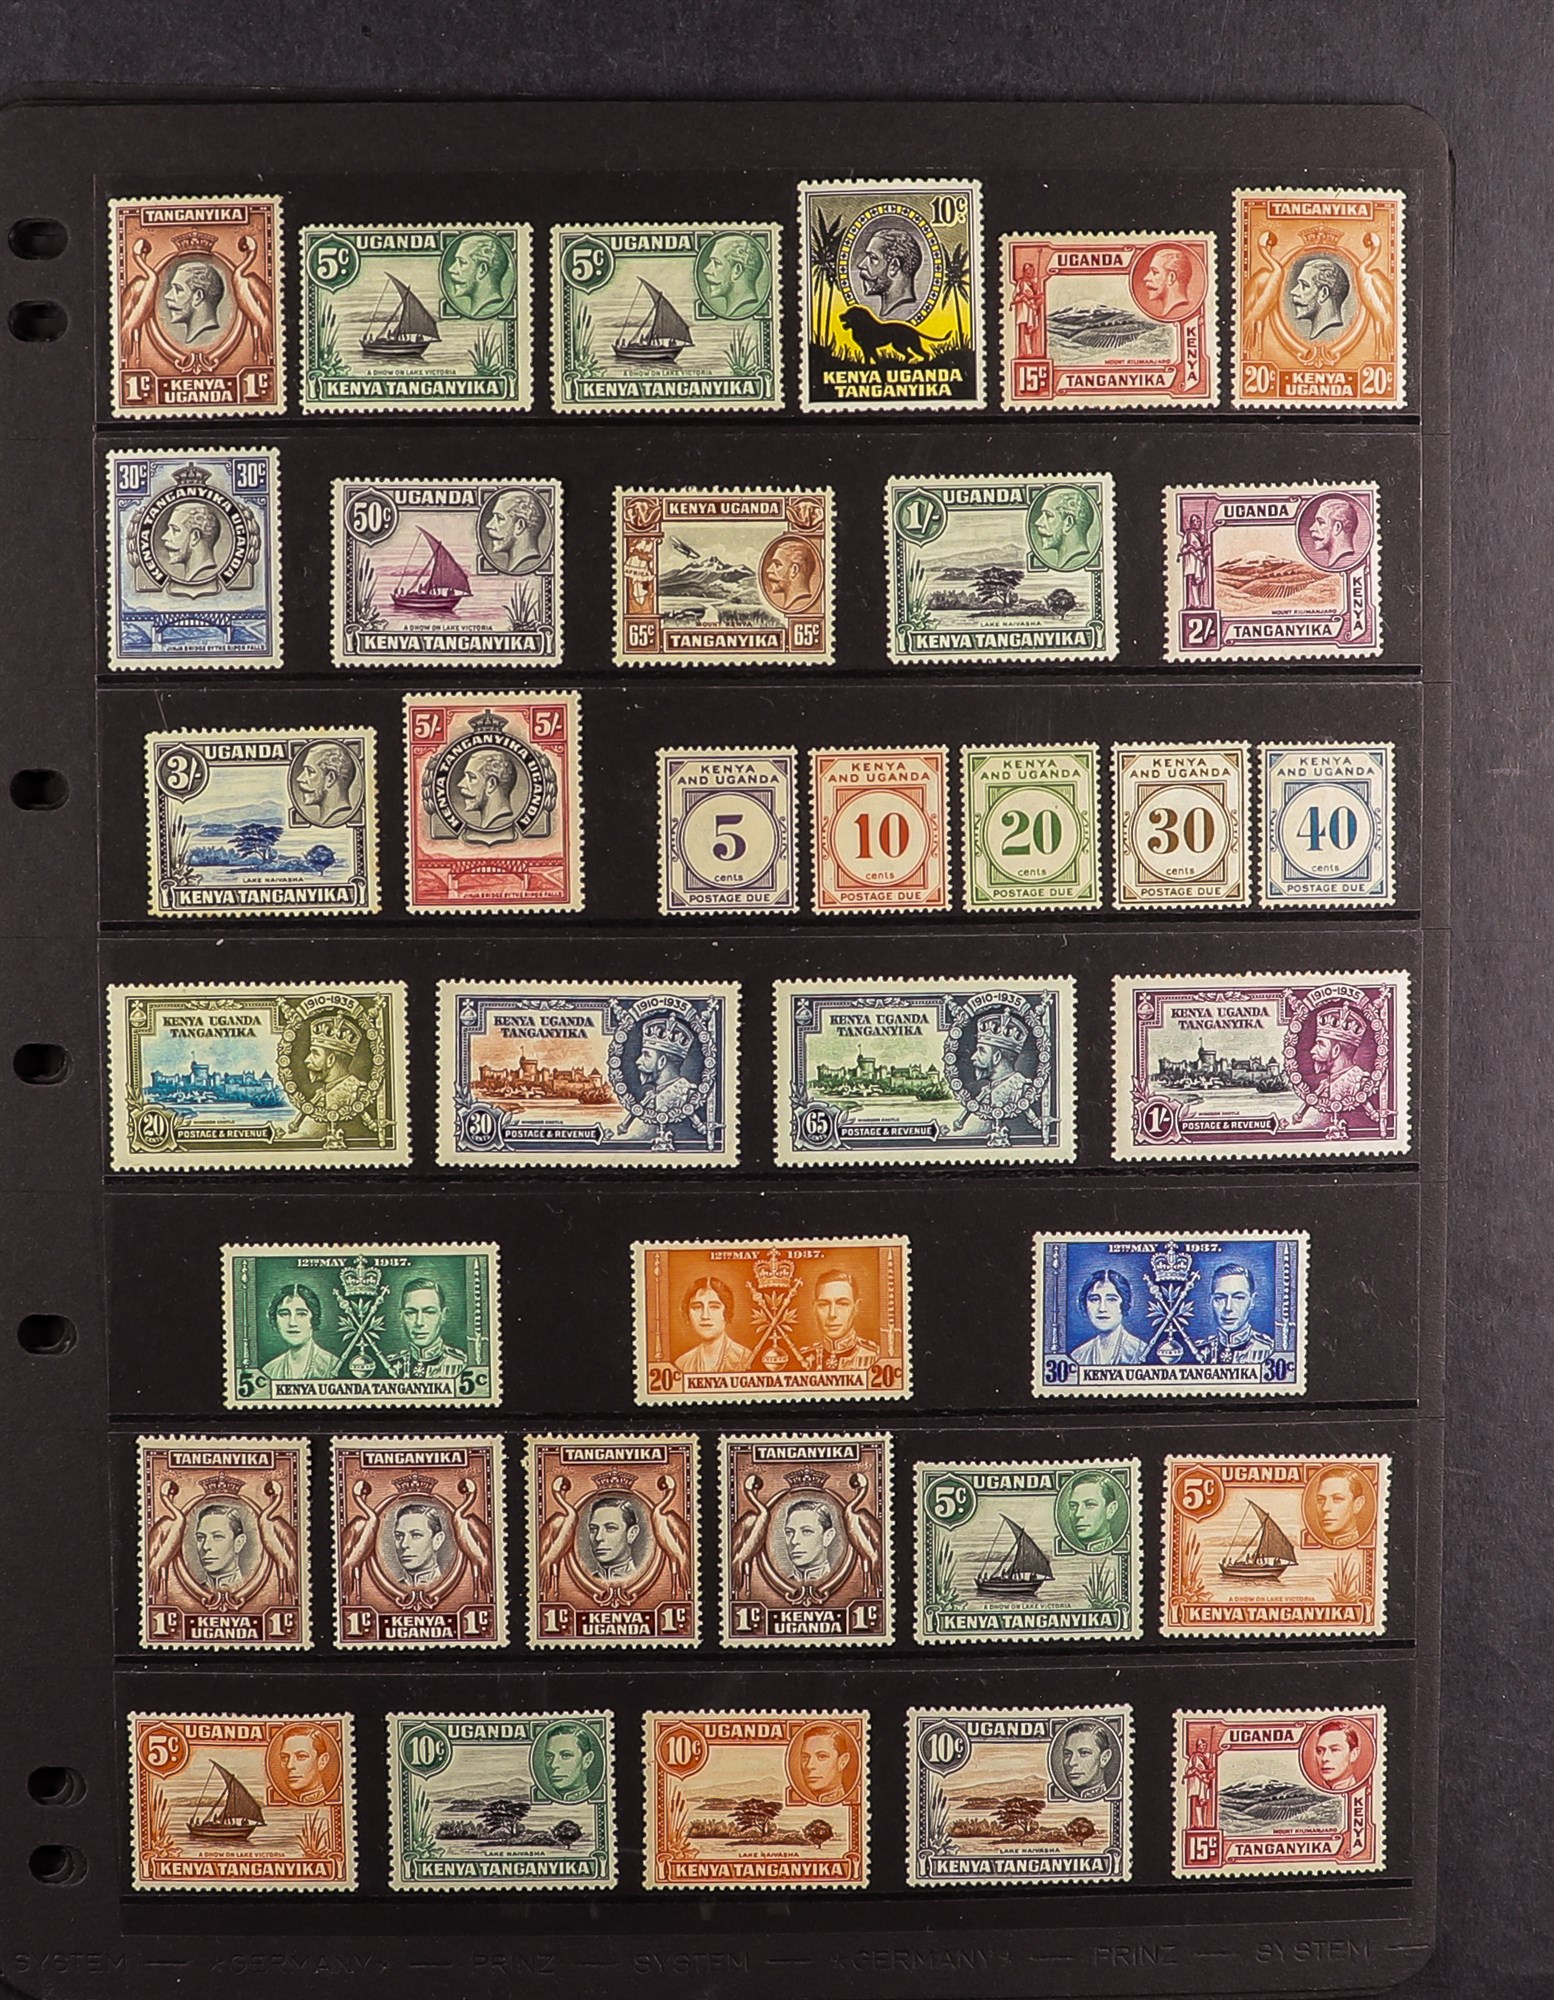 K.U.T. 1935 - 1962 COLLECTION of around 150 mint / some never hinged mint stamps on protective